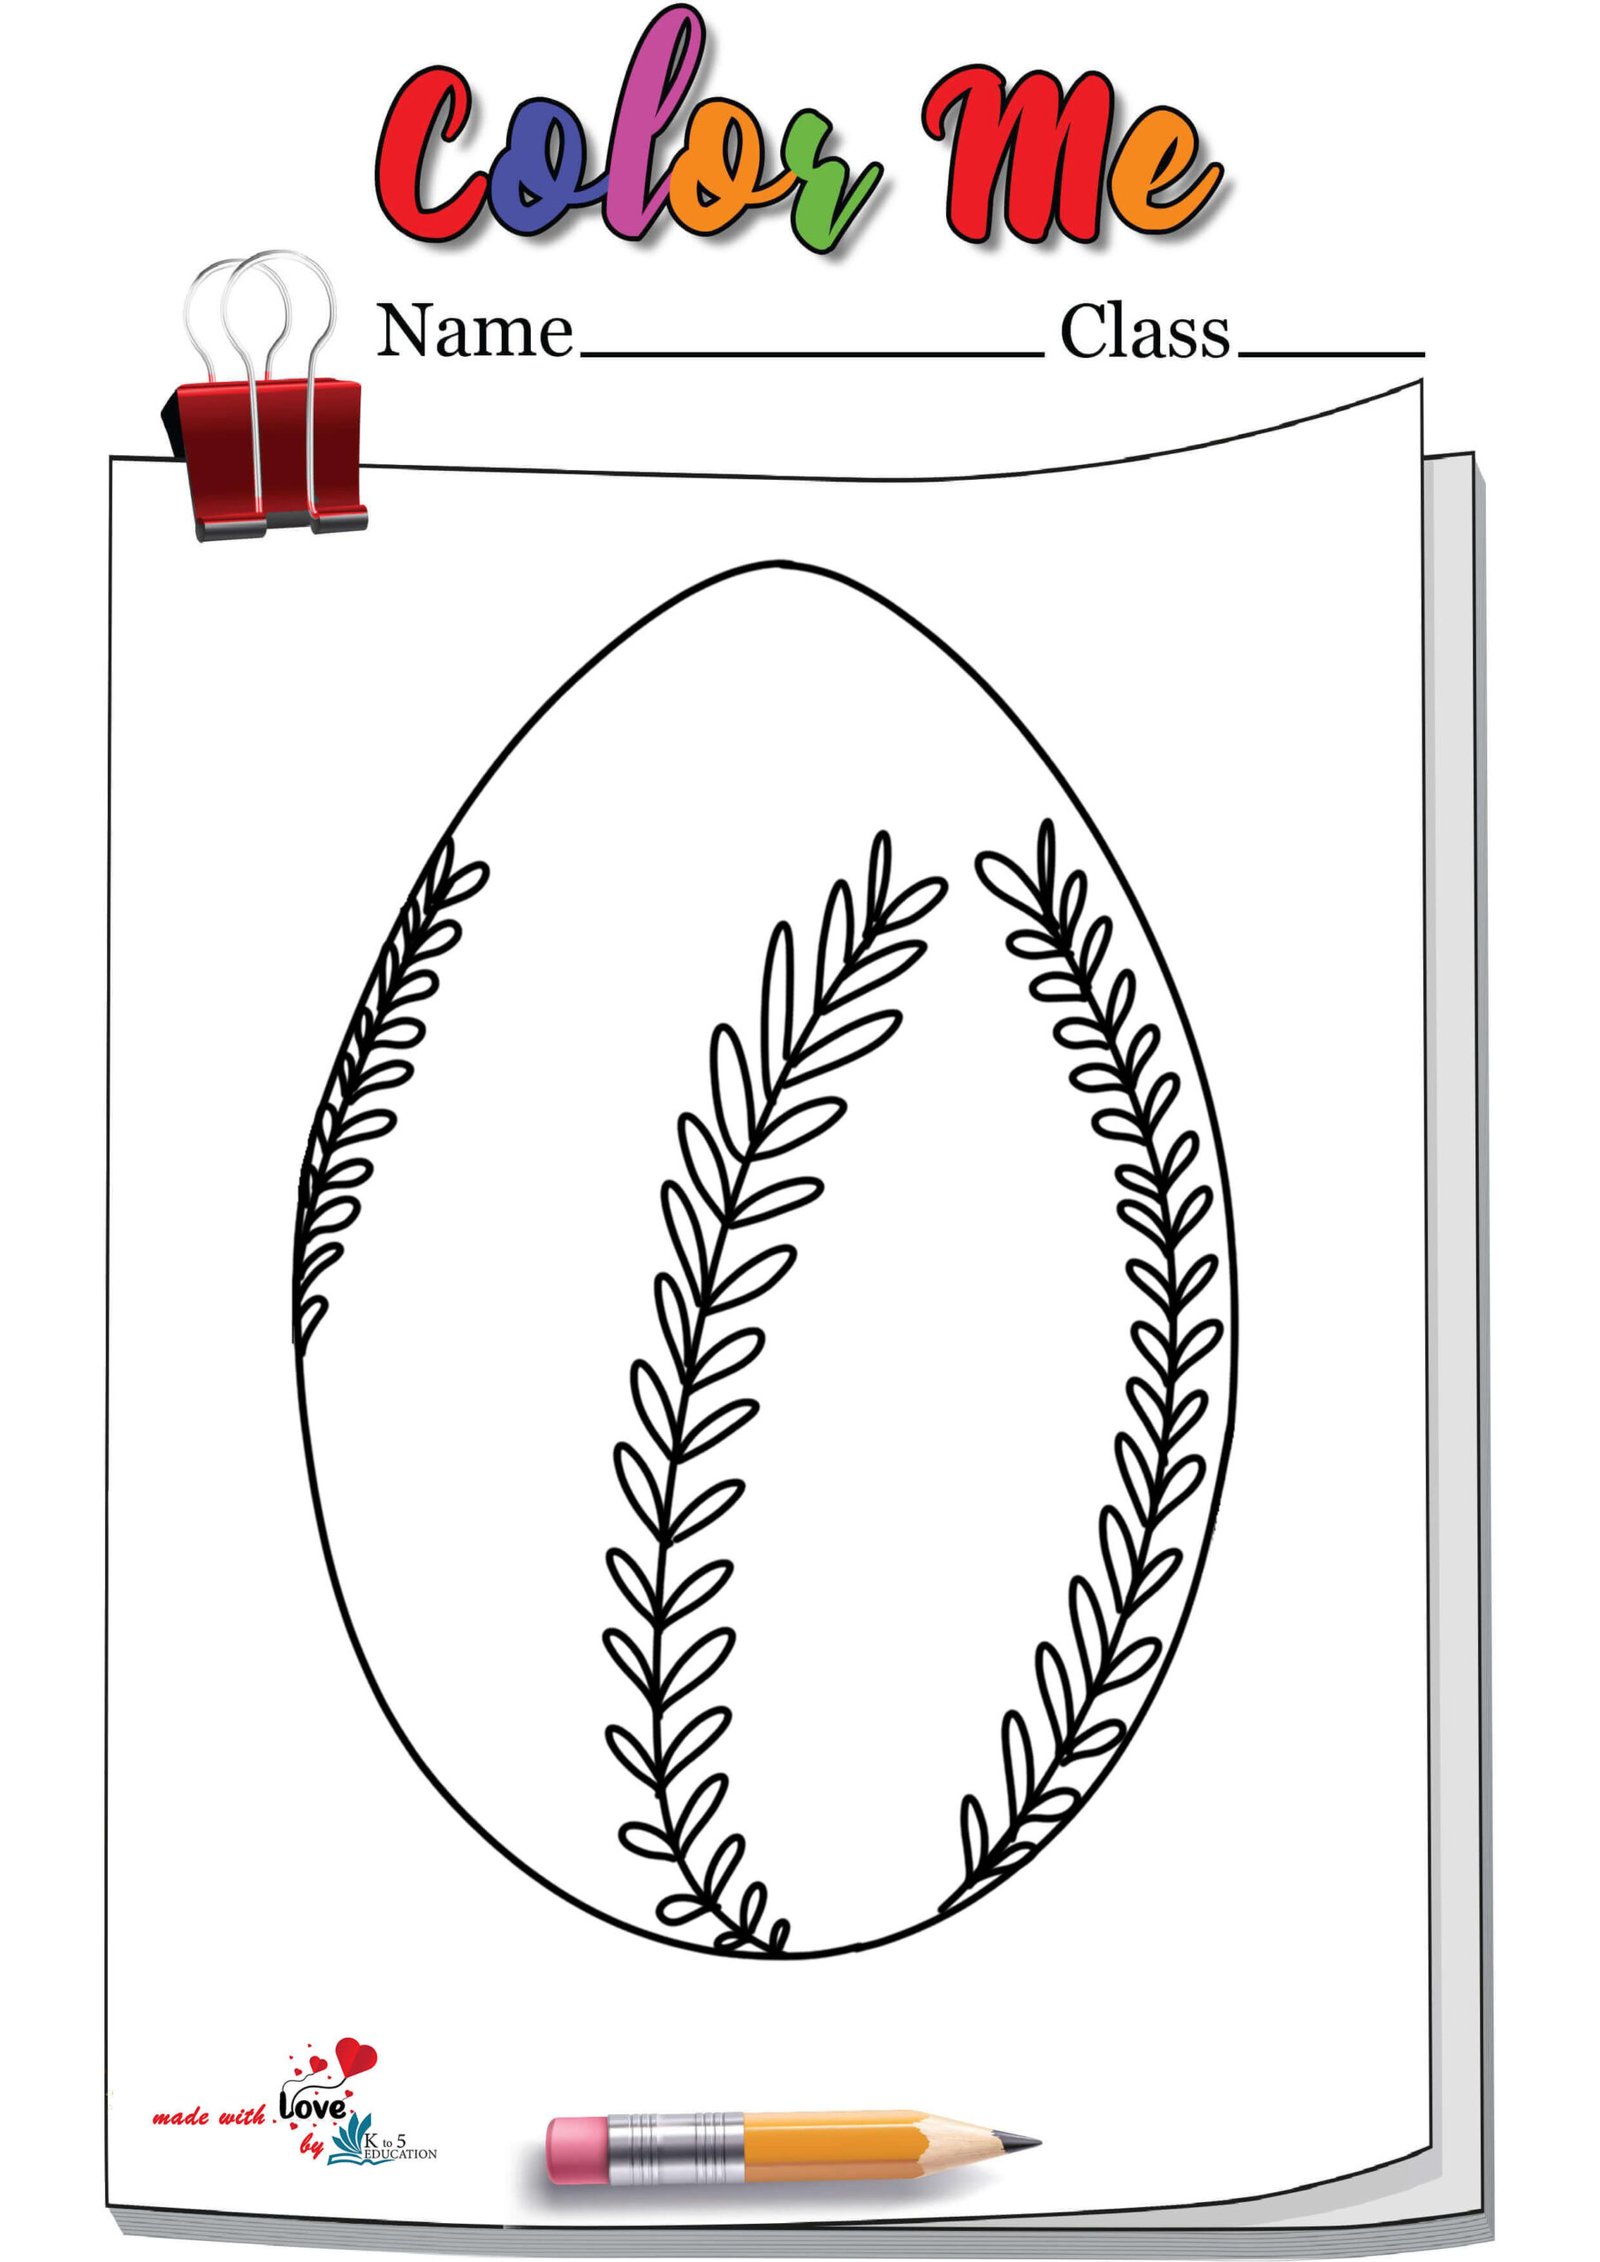 Spring Decorating Giant Easter Egg Coloring Page